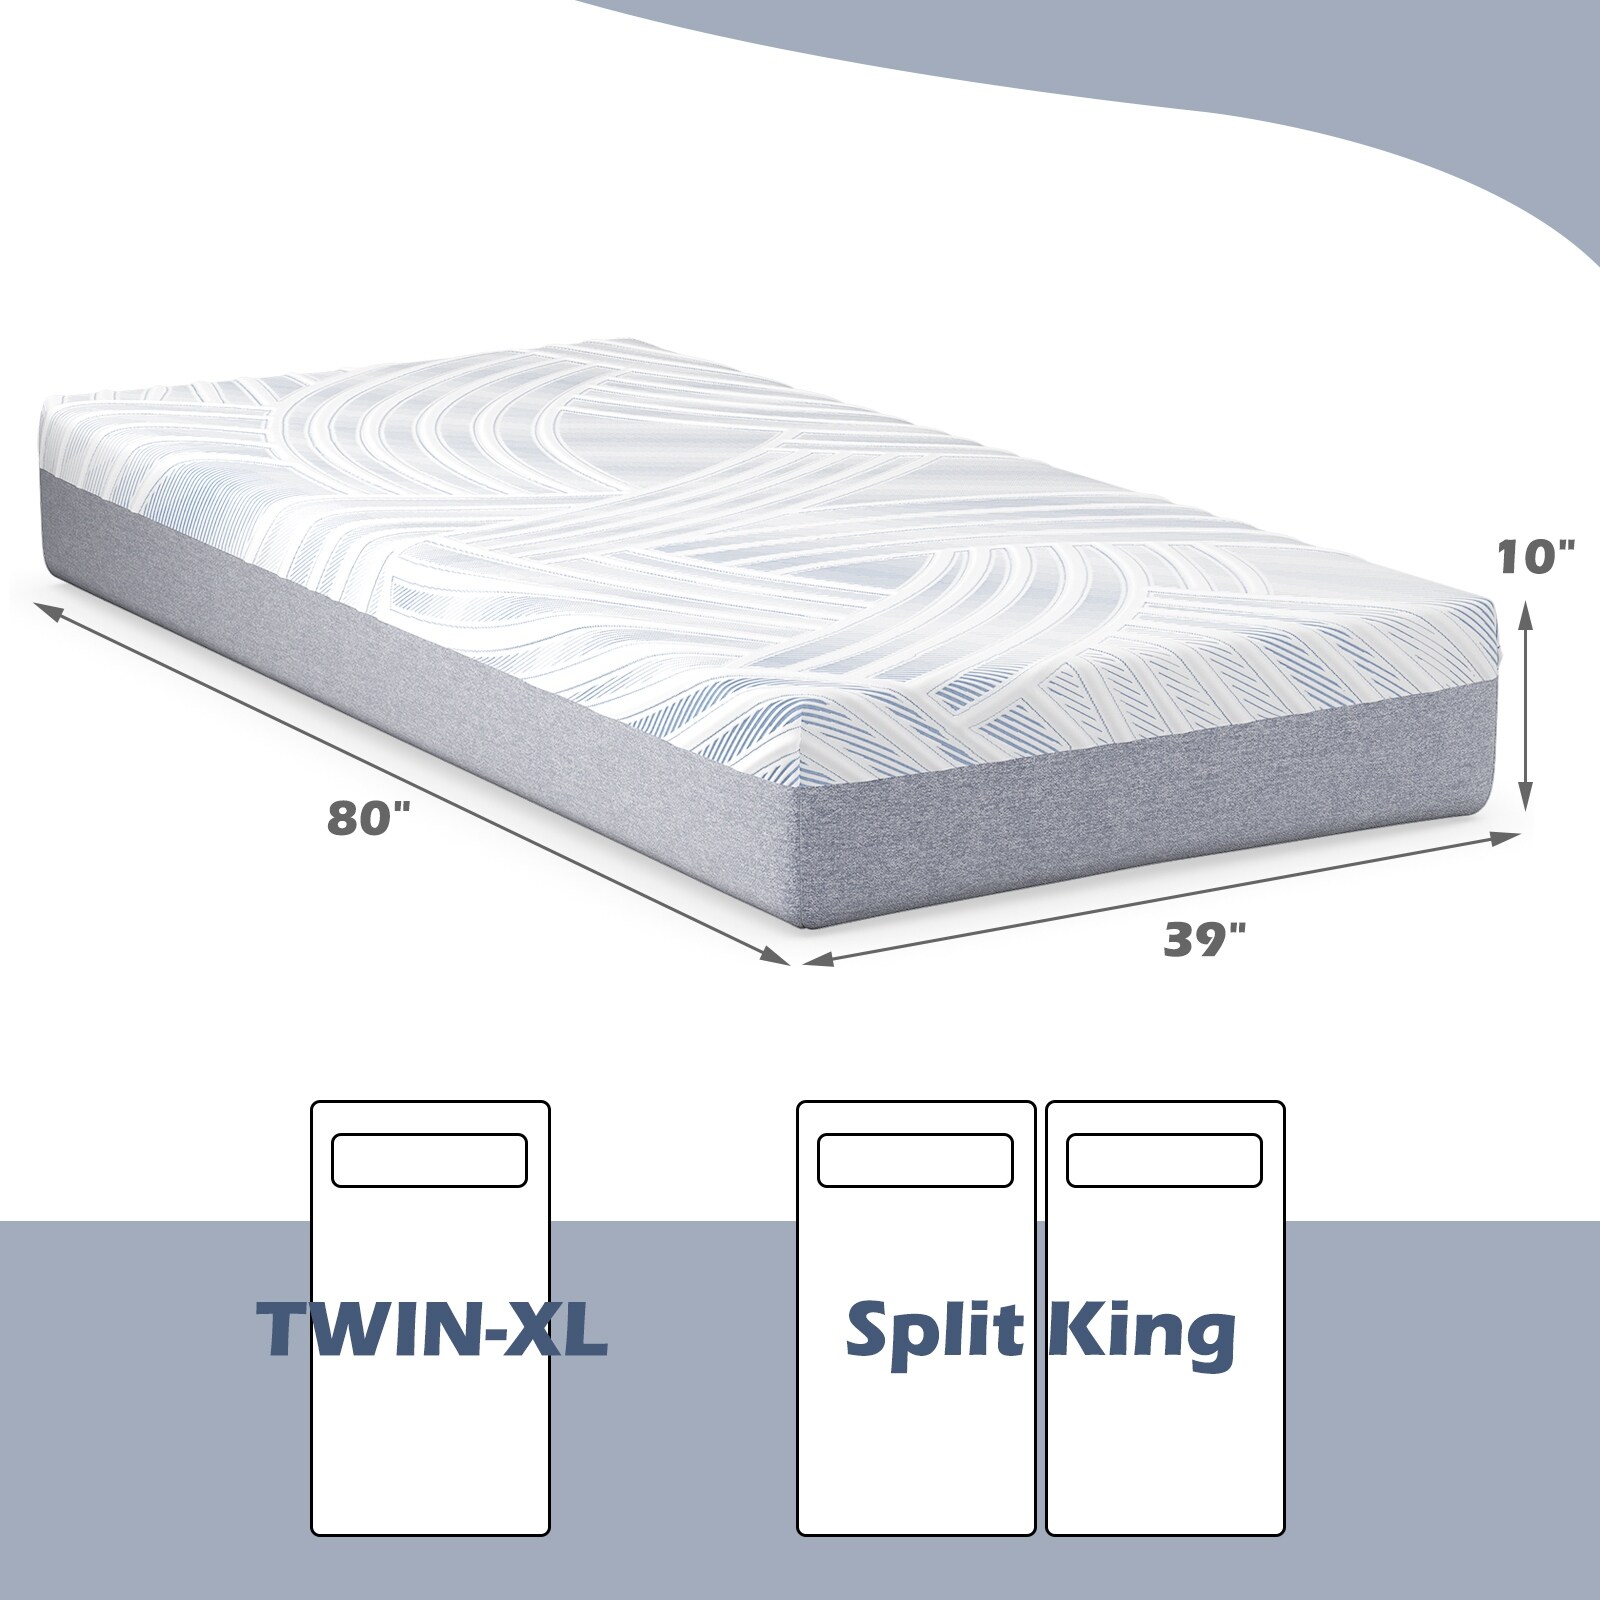 Twin XL Cooling Adjustable Bed Memory Foam Mattress-10 inches